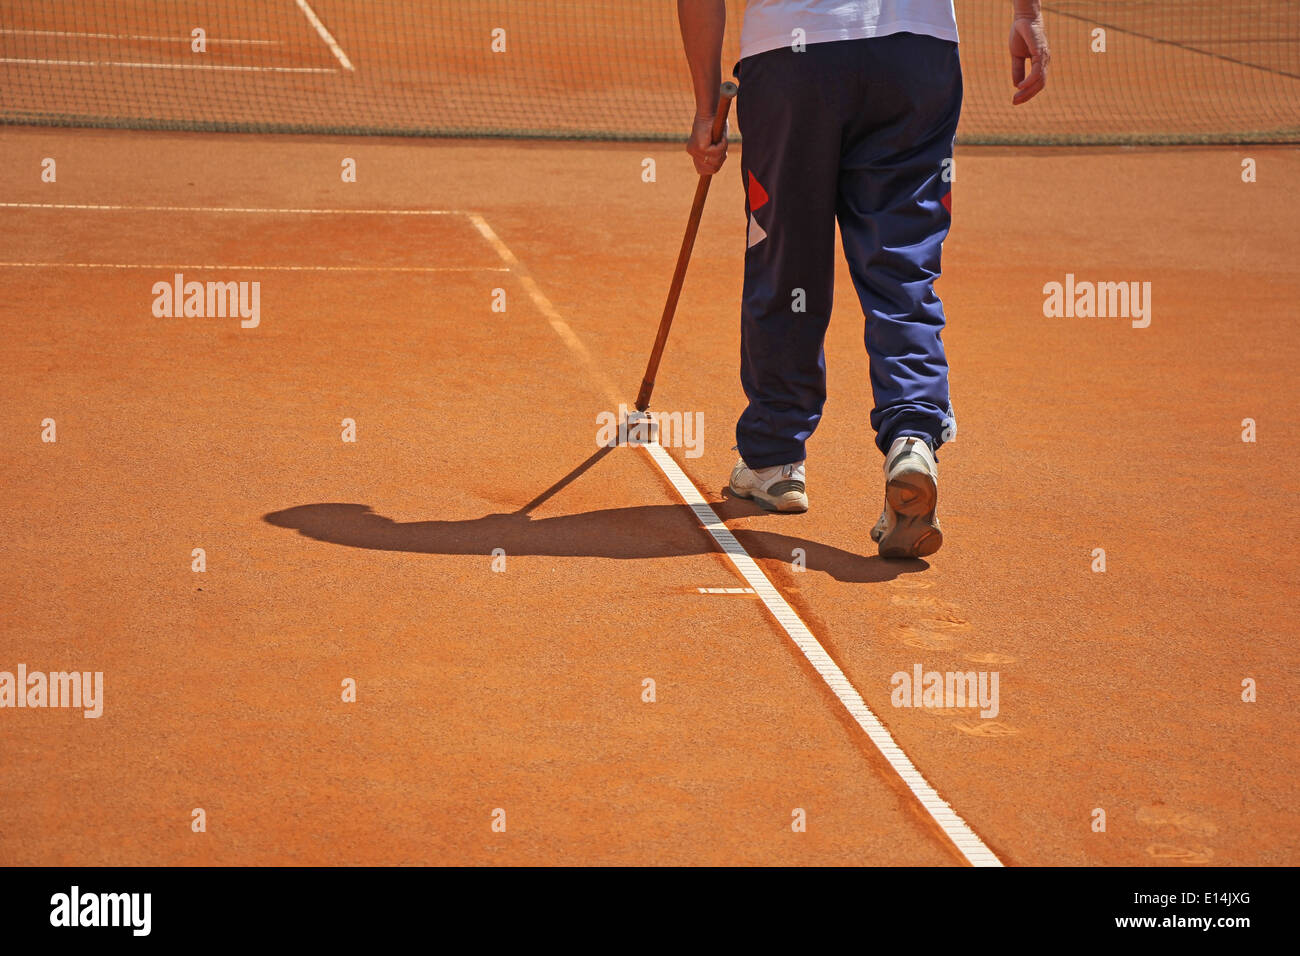 Cleaning the lines on a tennis court Stock Photo